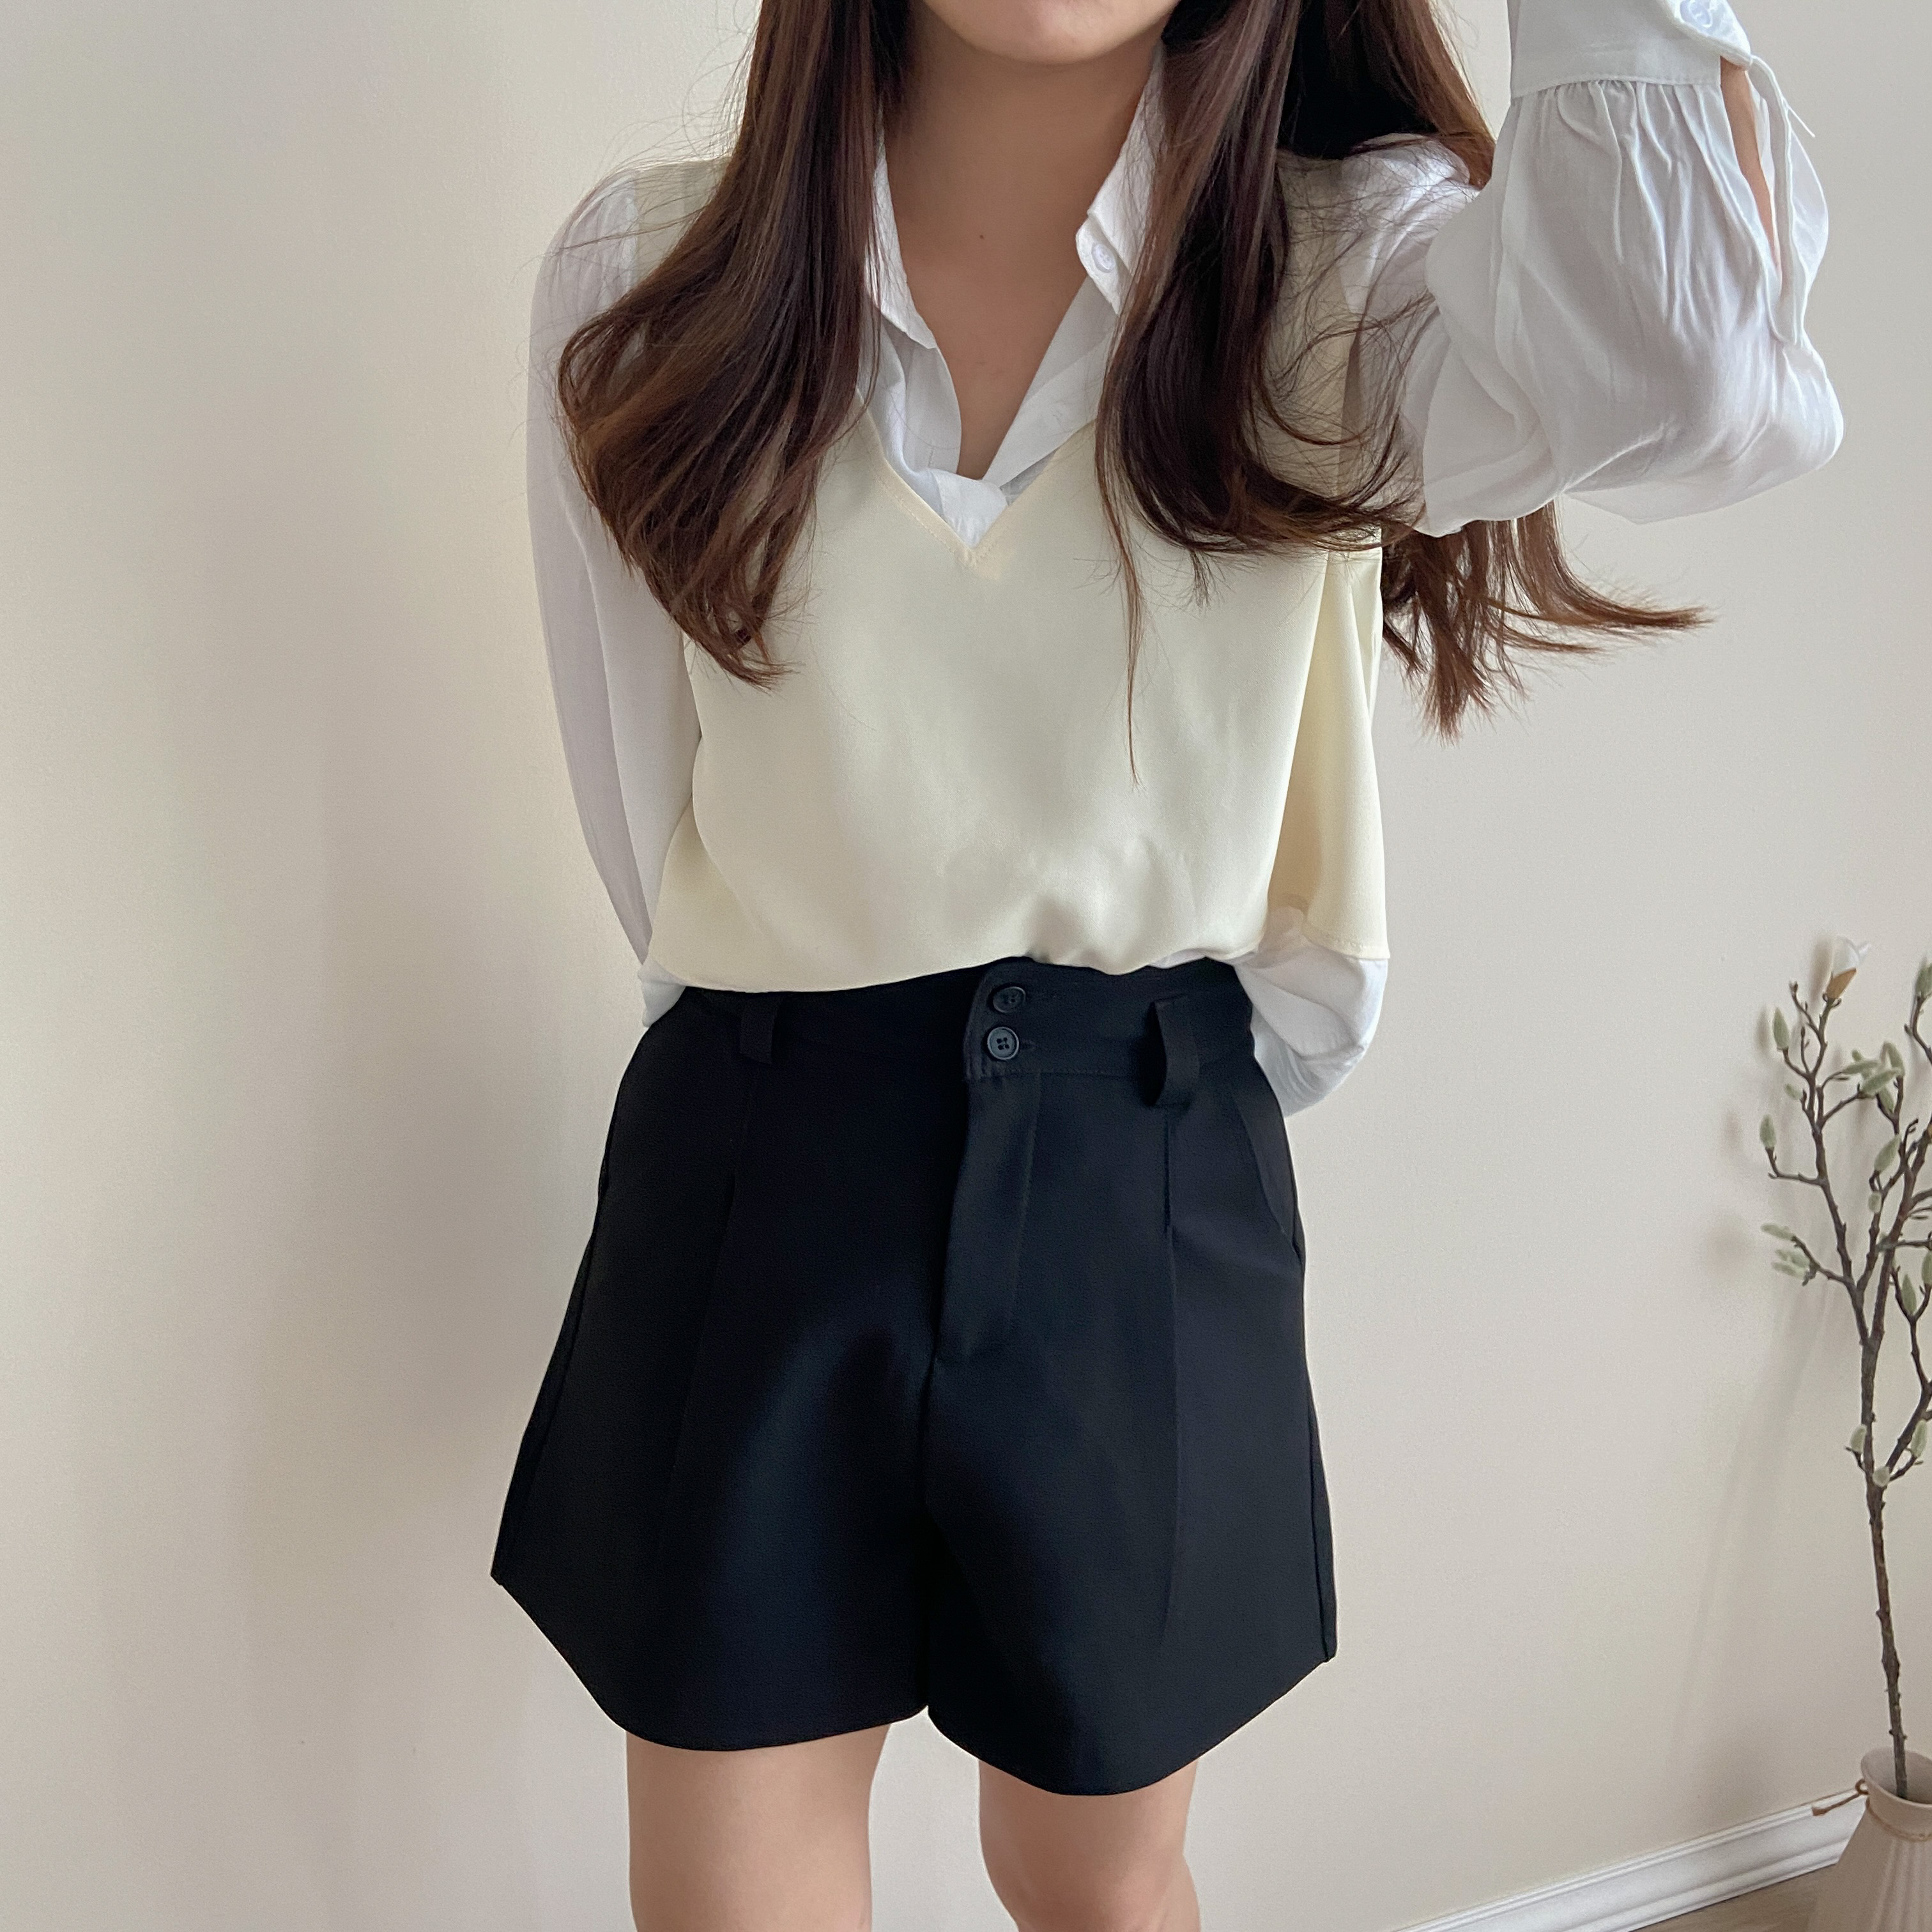 [REJECTED SALE] Fake Two Pieces Blouse in Cream 温柔杏色假两件衬衫